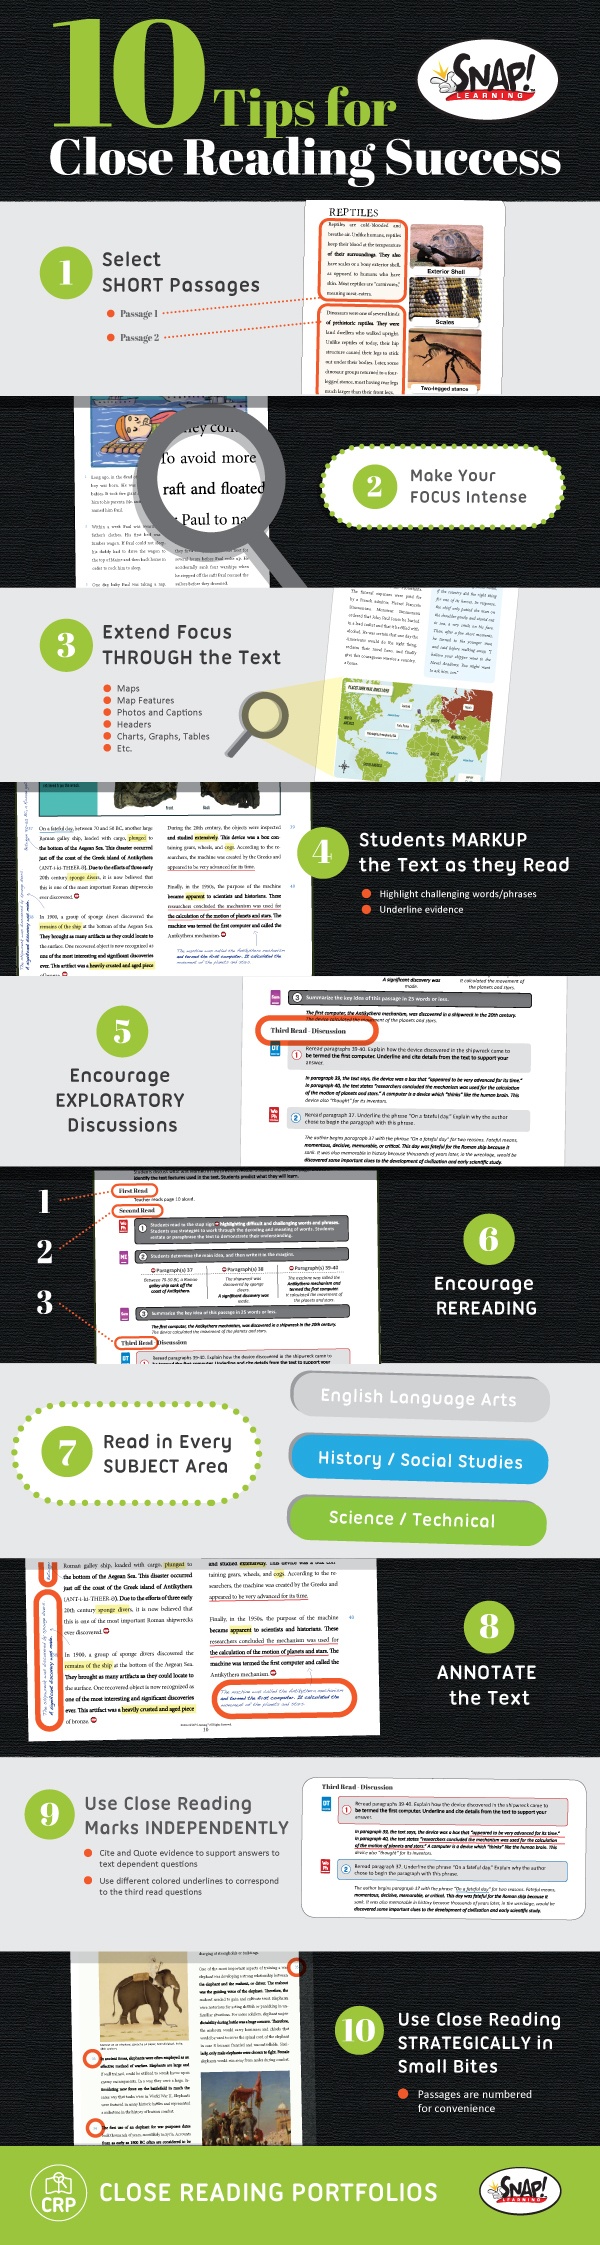 10 Tips for Close Reading Activities Infographic